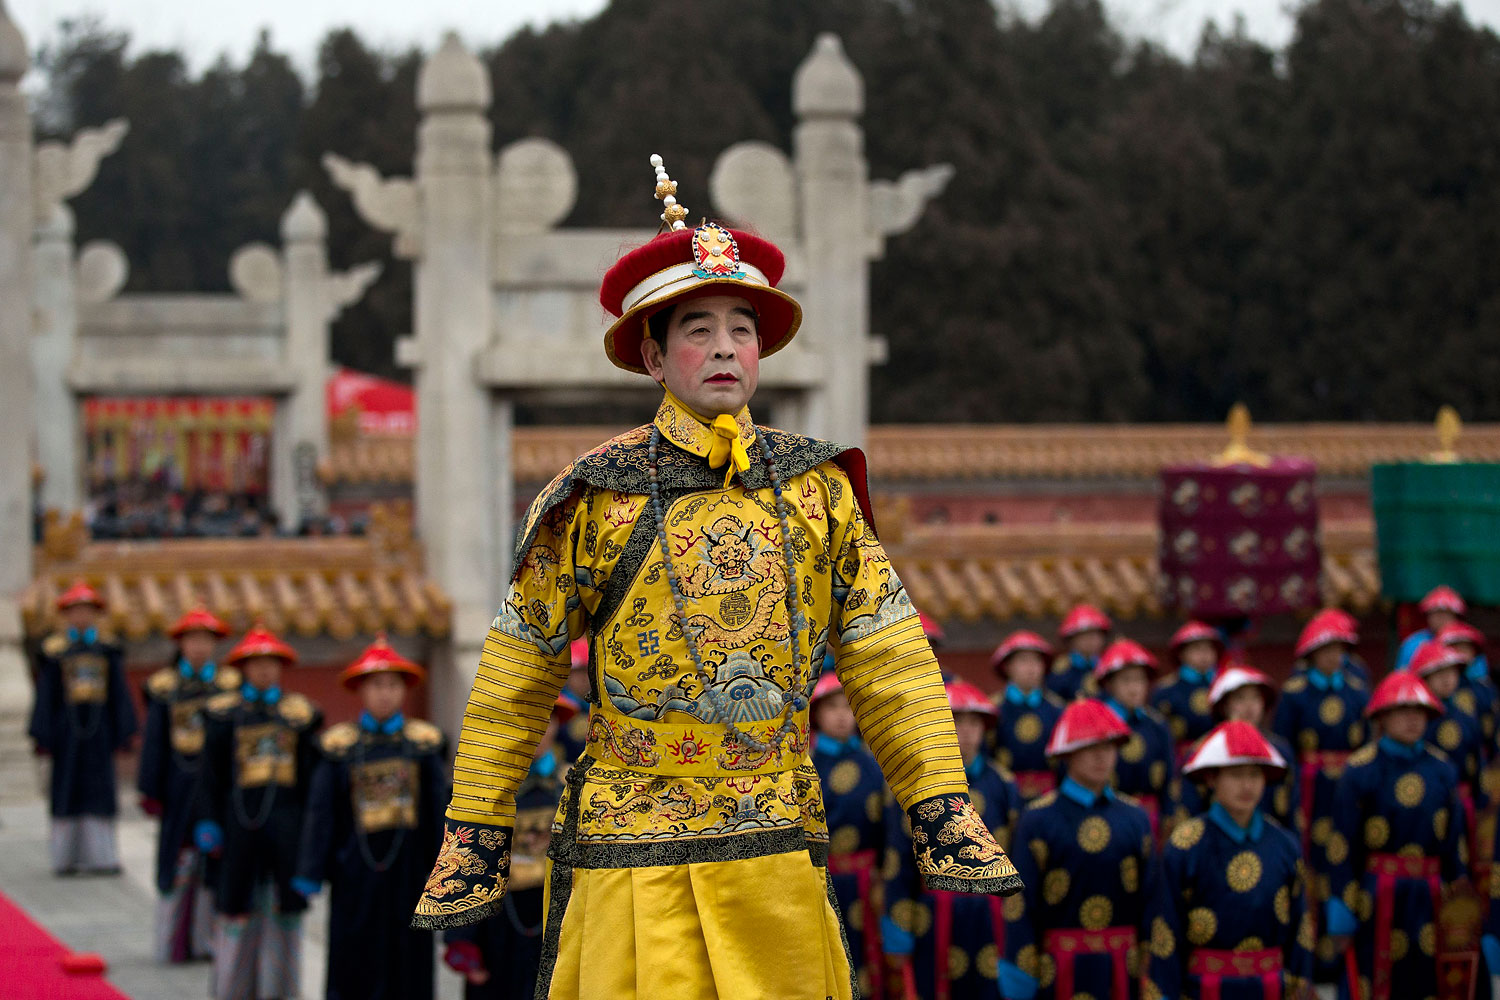 A man dressed as a Qing Dynasty emperor performs in a reenactment of an imperial ritual ceremony praying for good harvest in the coming year at the Temple of Earth park on the Spring Festival in Beijing Jan. 31, 2014.